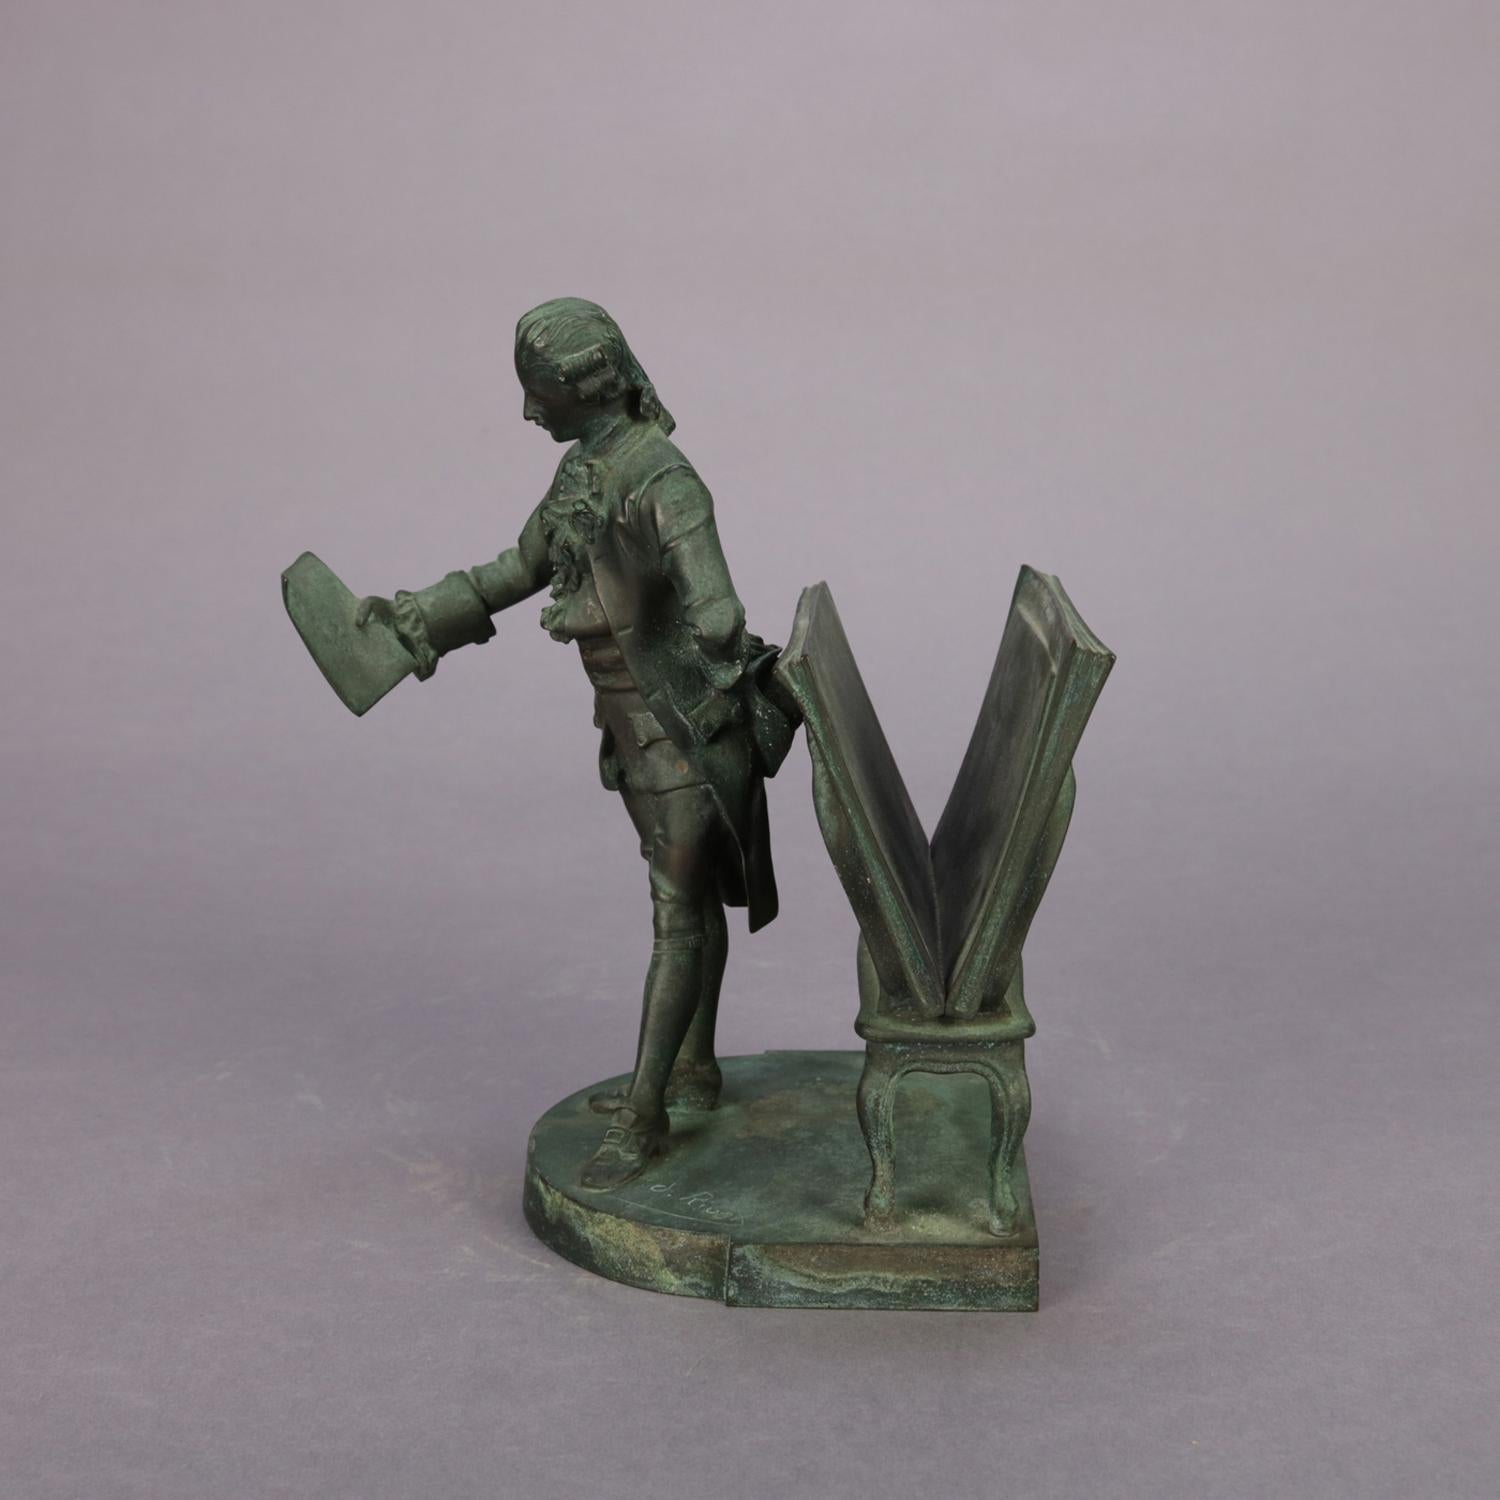 An antique French figural bronze features artist and his portfolio with verdigris finish signed at feet Rd. Rivex, circa 1890.

***DELIVERY NOTICE – Due to COVID-19 we are employing NO-CONTACT PRACTICES in the transfer of purchased items. 